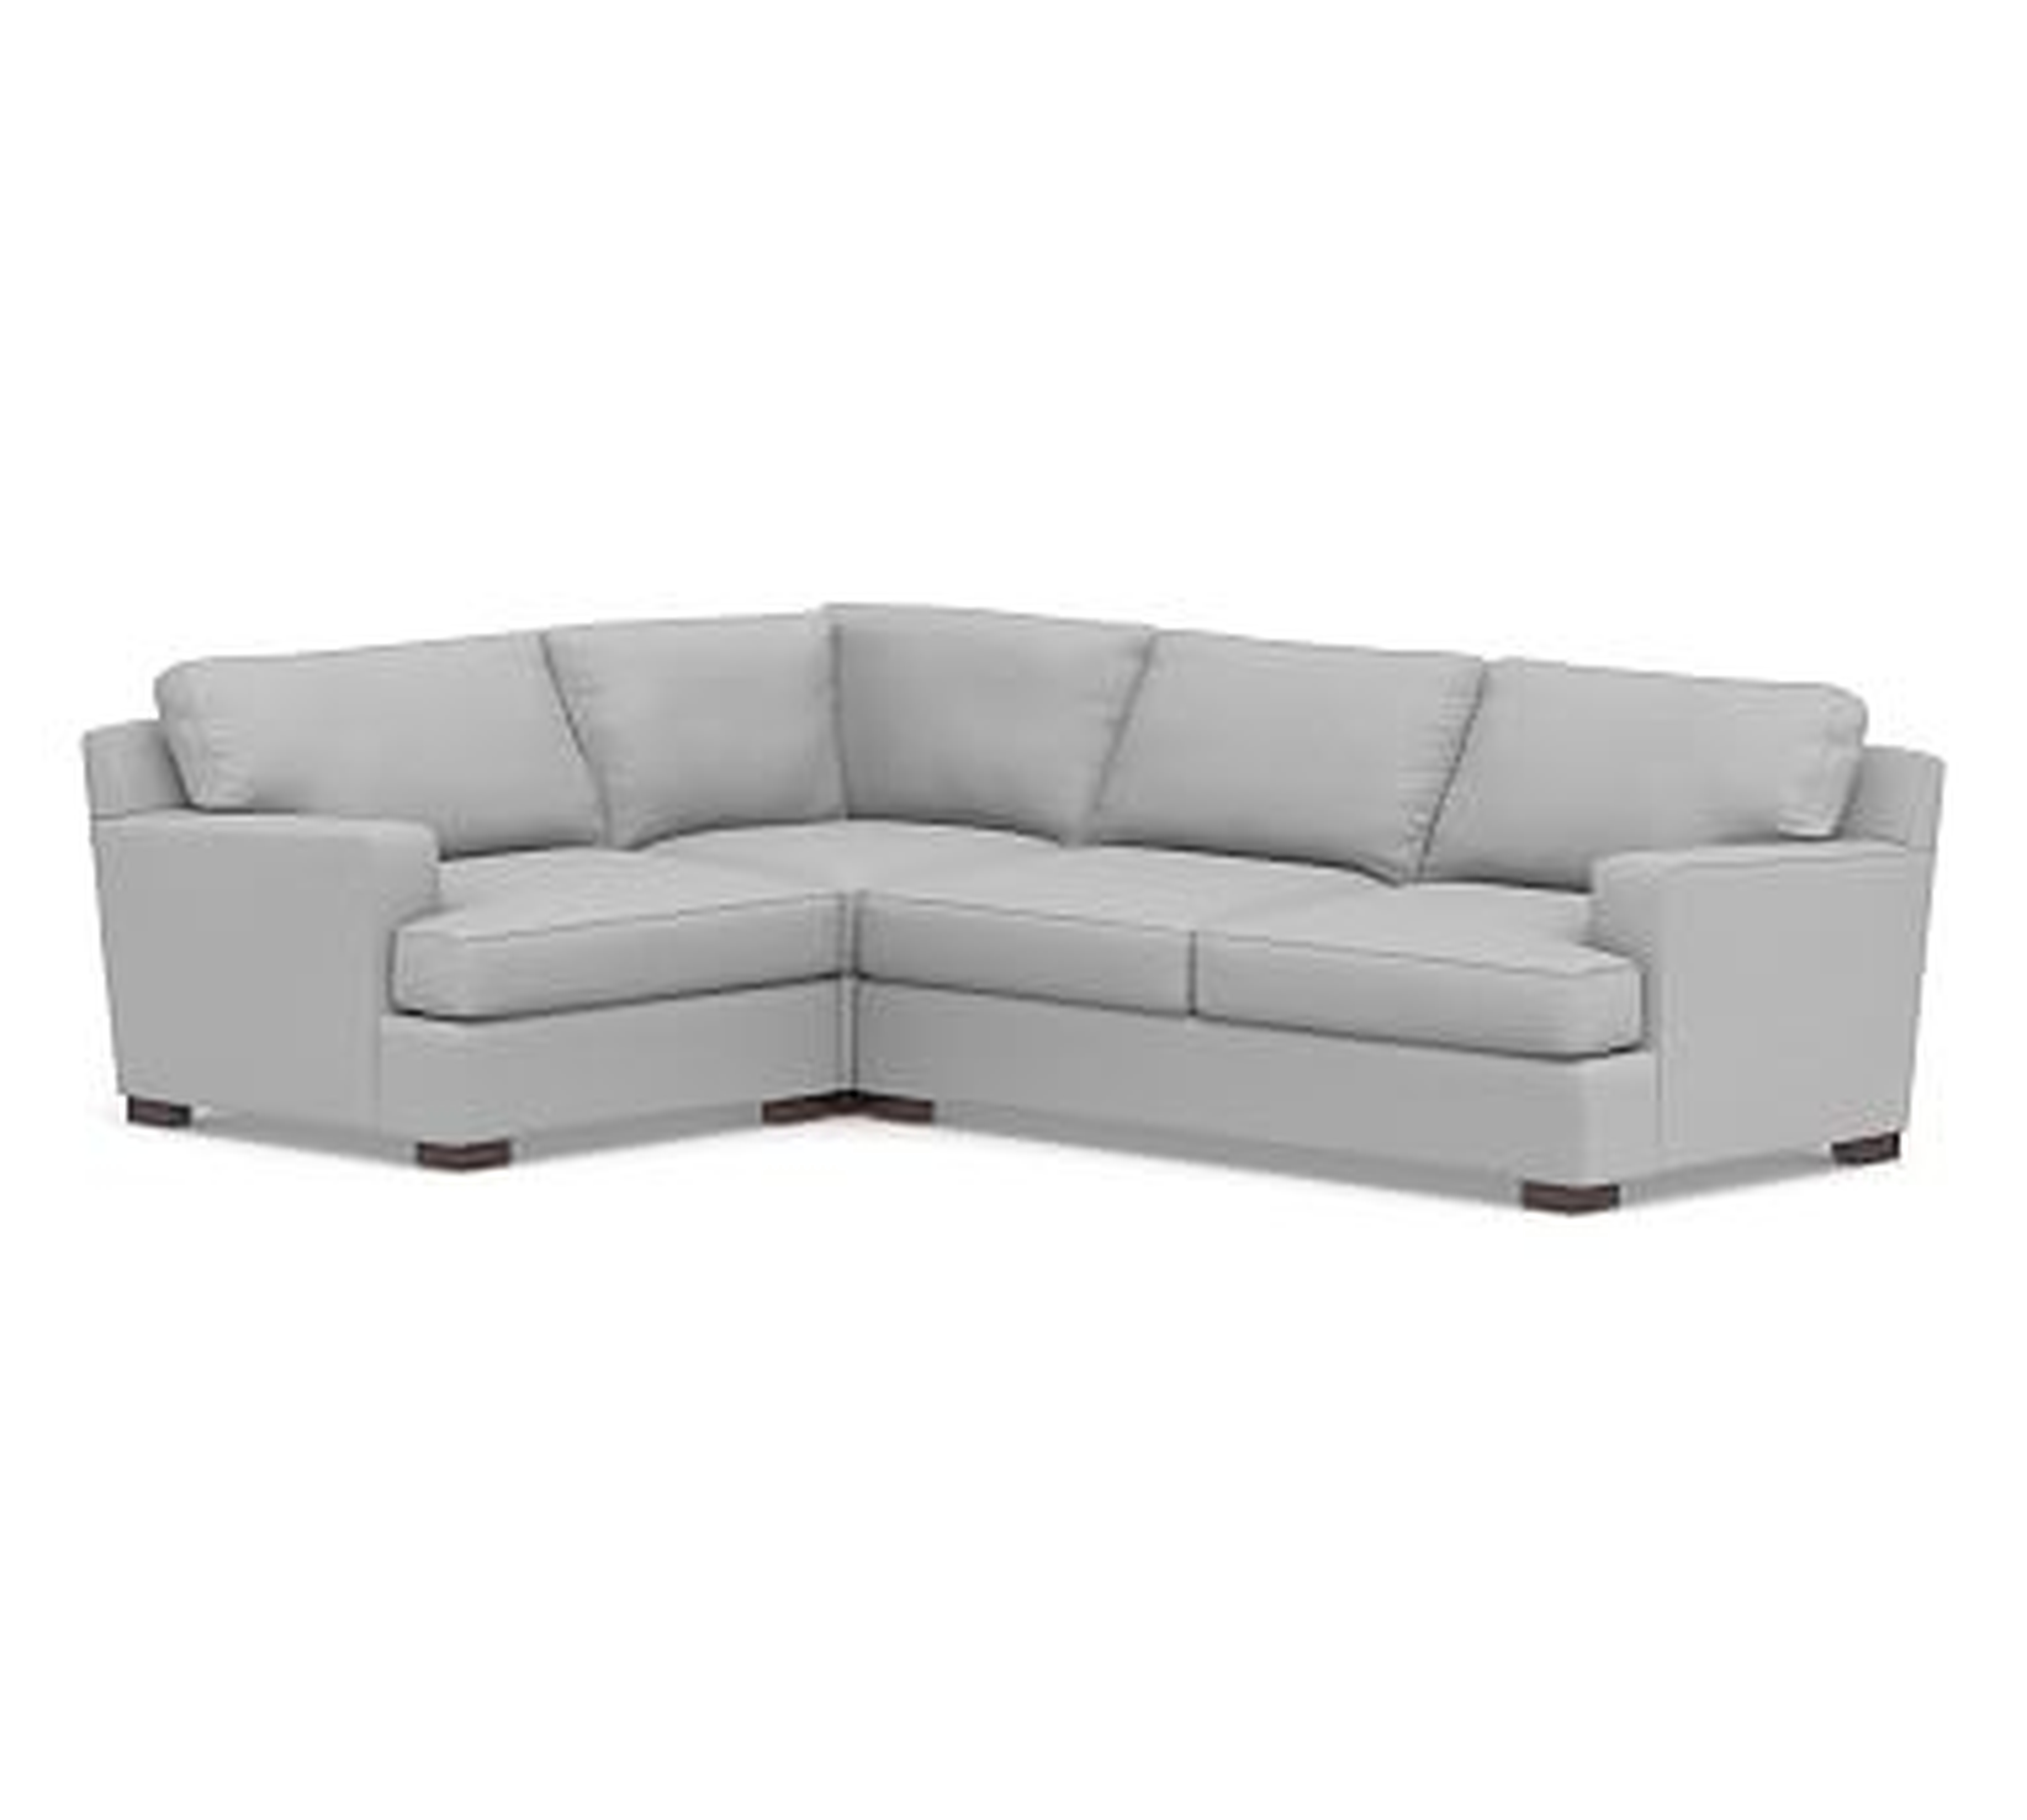 Townsend Square Arm Upholstered Right Arm 3-Piece Corner Sectional, Polyester Wrapped Cushions, Brushed Crossweave Light Gray - Pottery Barn